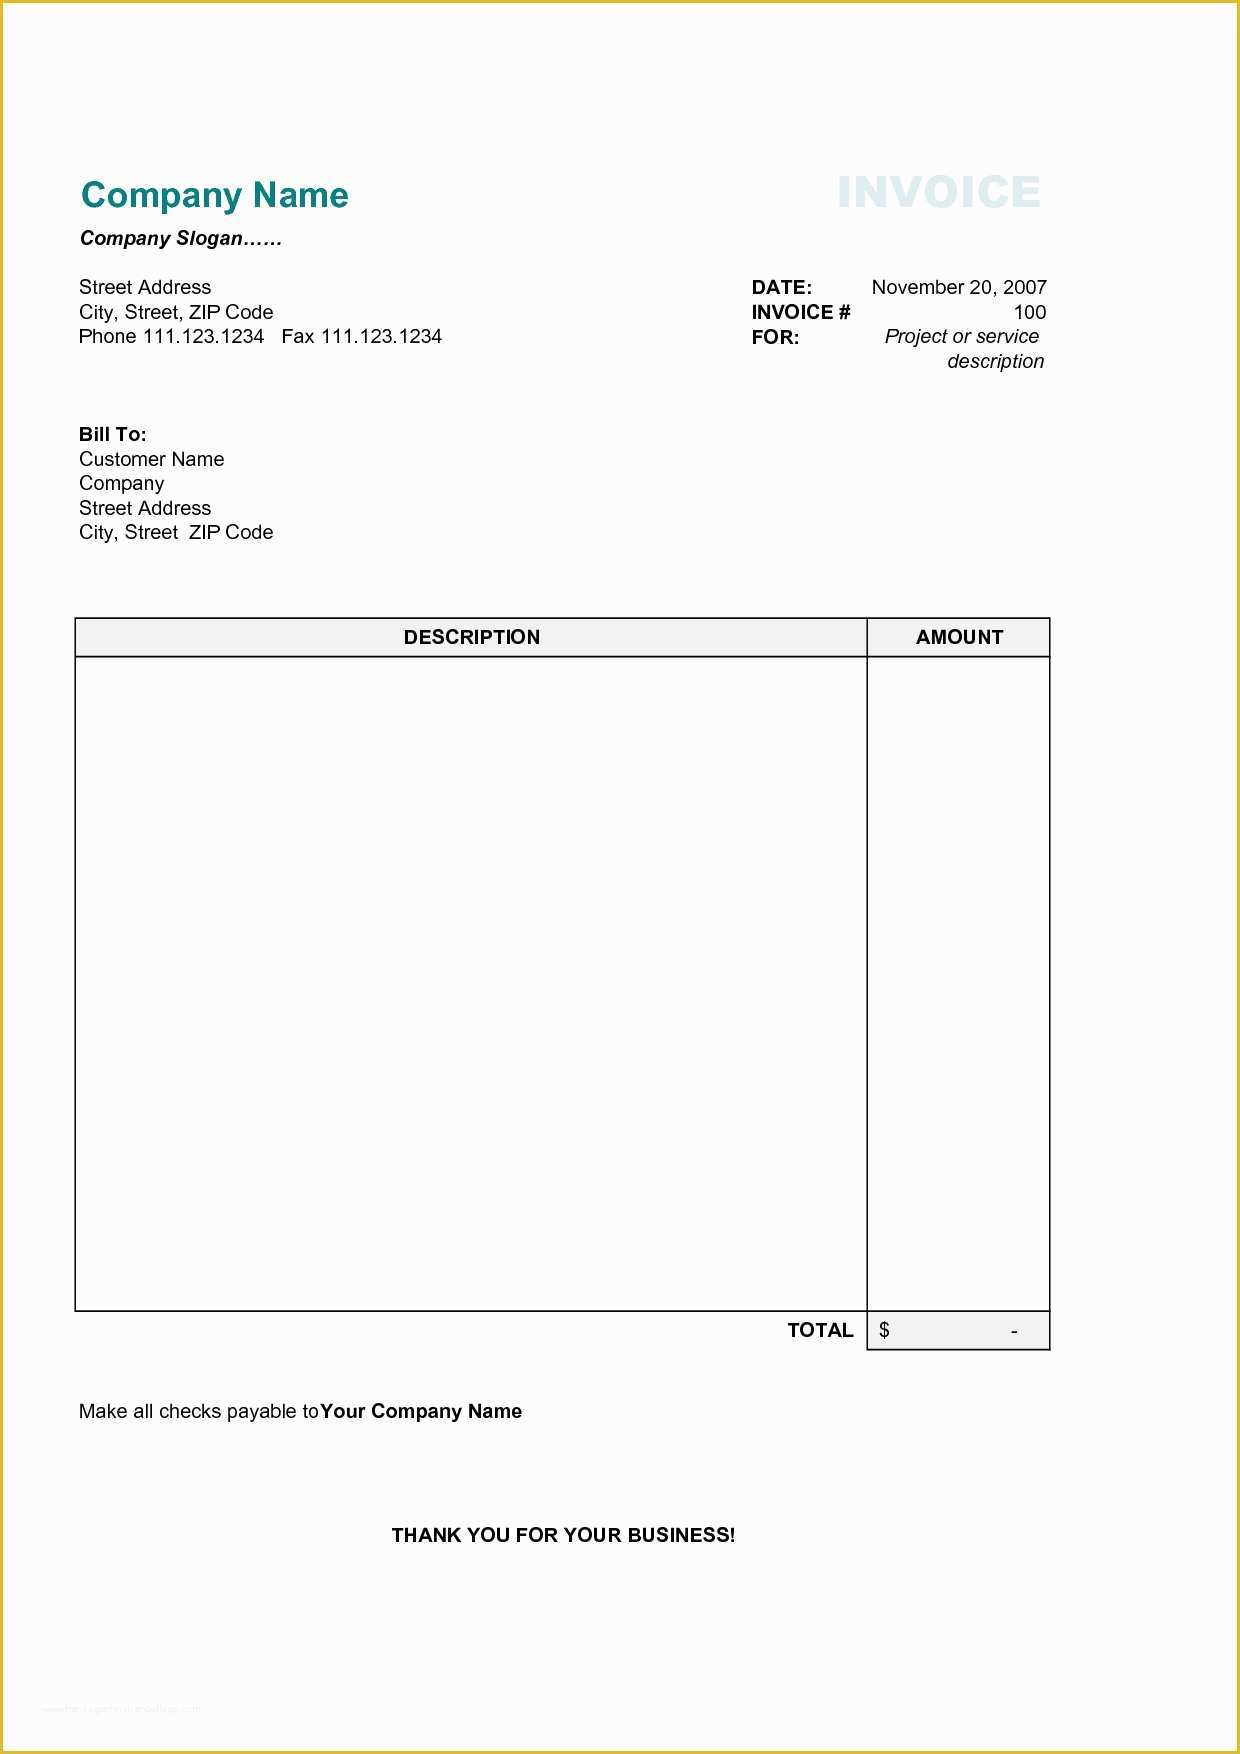 Microsoft Excel Invoice Template Free Of Simple Invoice Template